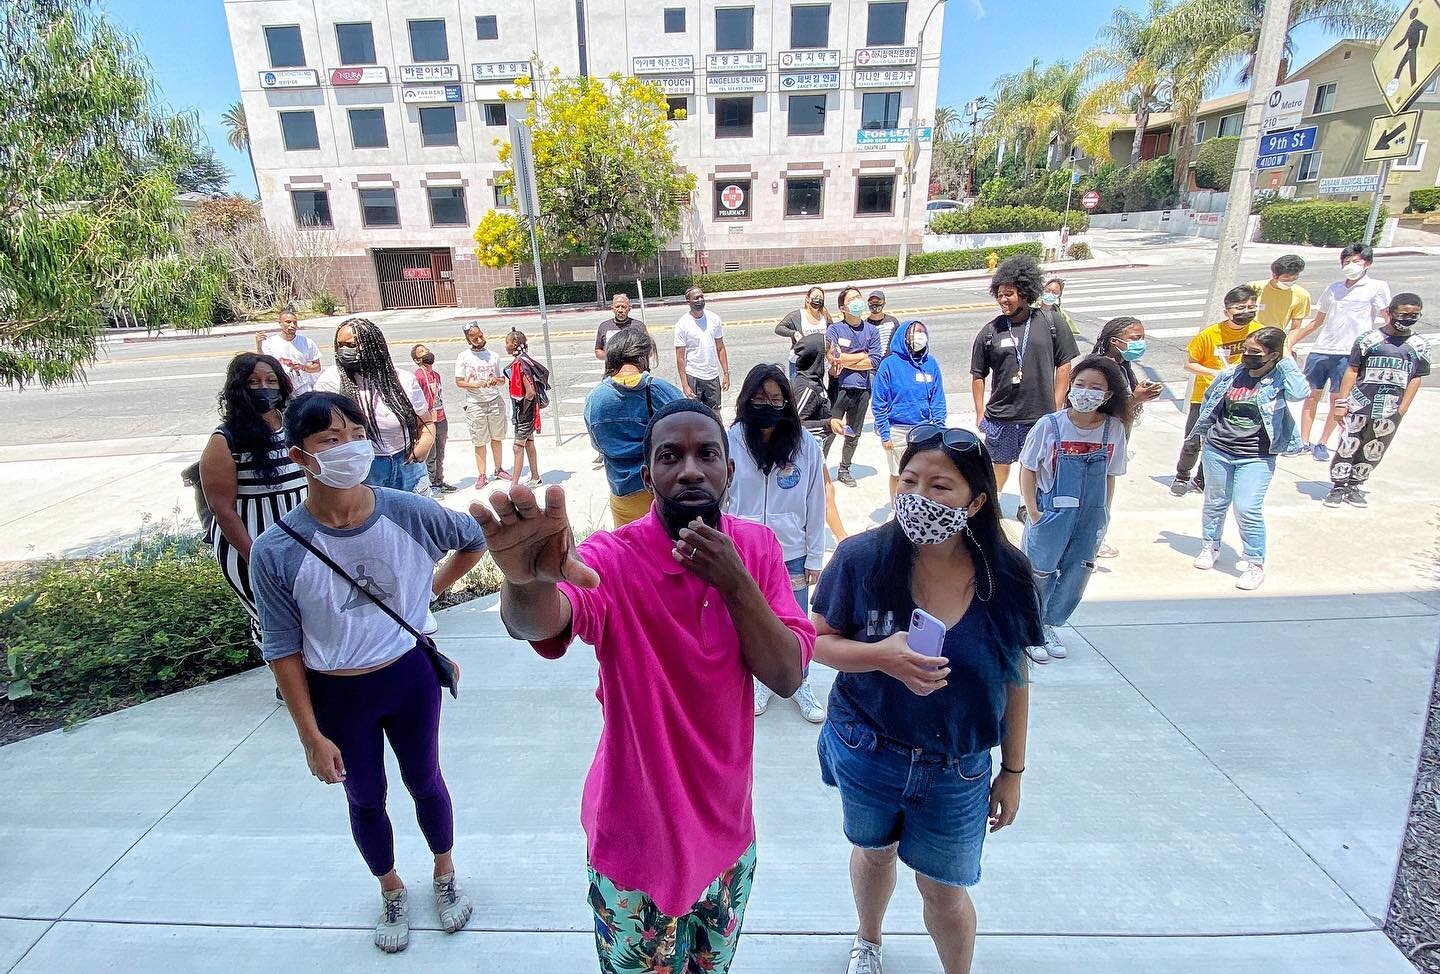 Last Saturday, youth enrolled in the Black and API Solidarity Mural Project met for the first of eight sessions at KRC's Crenshaw office location. Funded by the County of LA, this exciting project will see teens from Black and API communities working